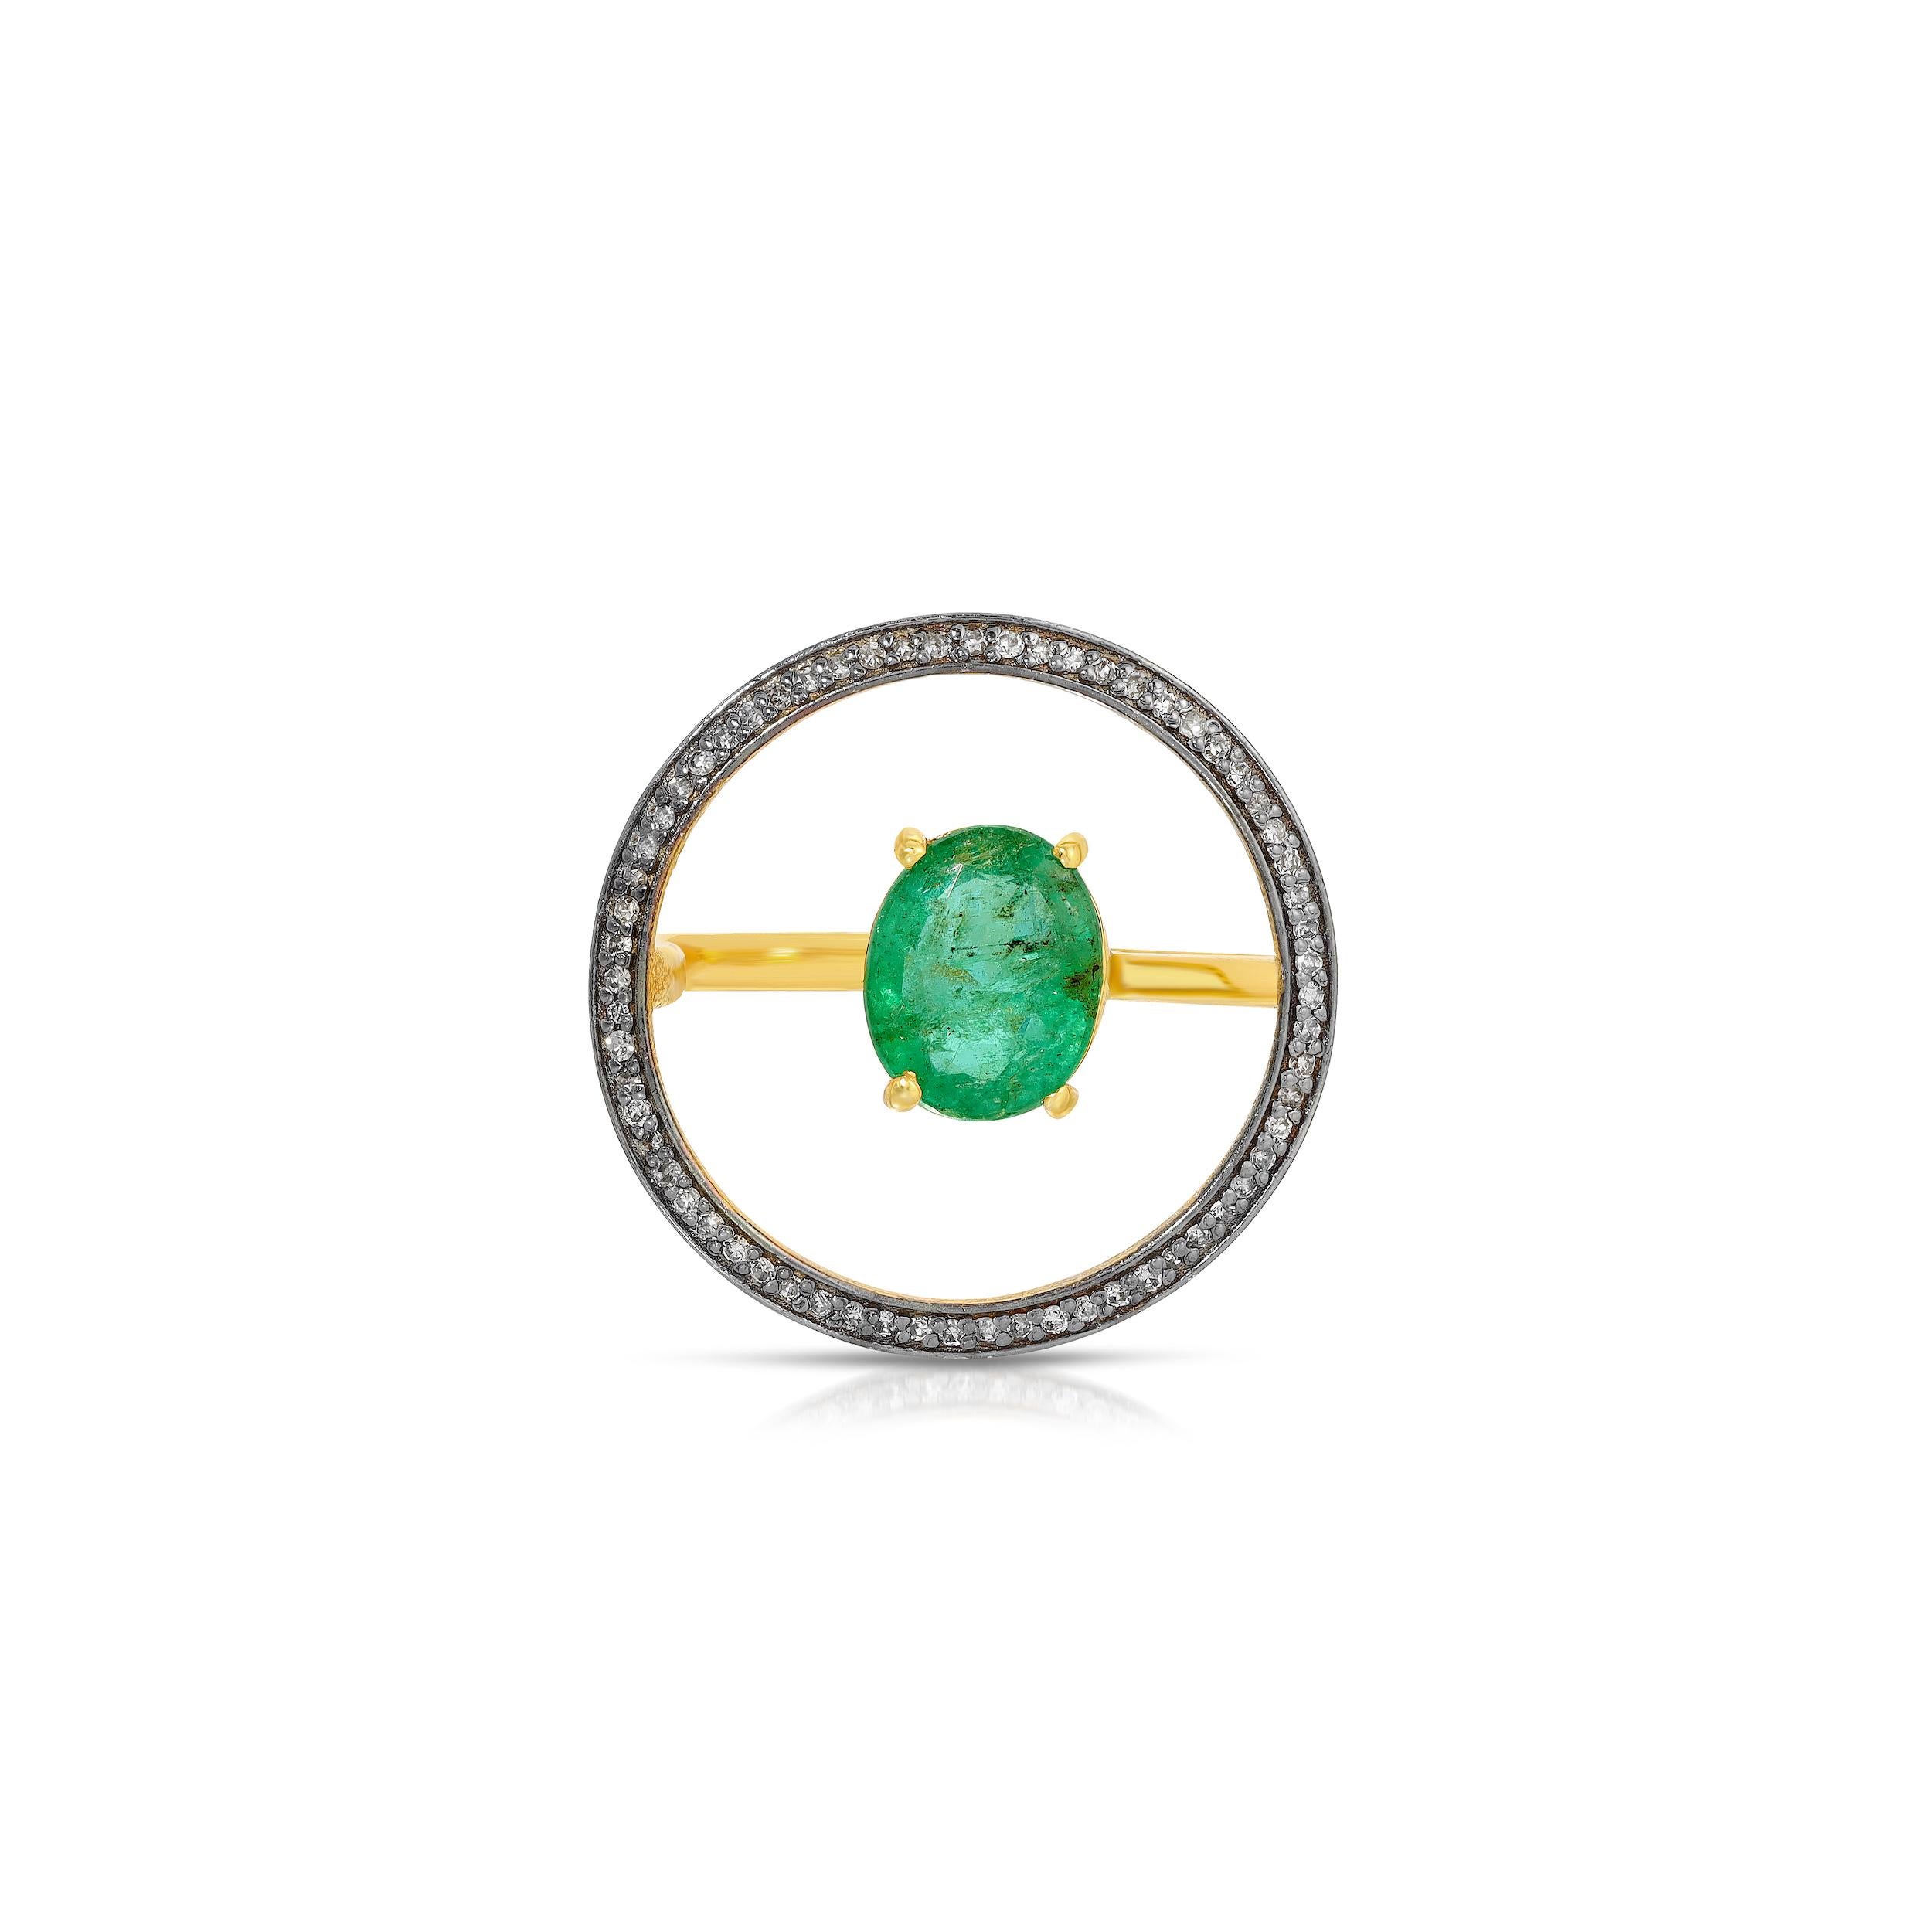 A fiery, oval cut 1.49 Carats Emerald in an unusual design which gives the illusion of the Emerald being suspended and set in a halo of .18 Carats of White Diamonds. The Emerald is set on a ring of 22 Karat Gold overlay Silver and the sparkling